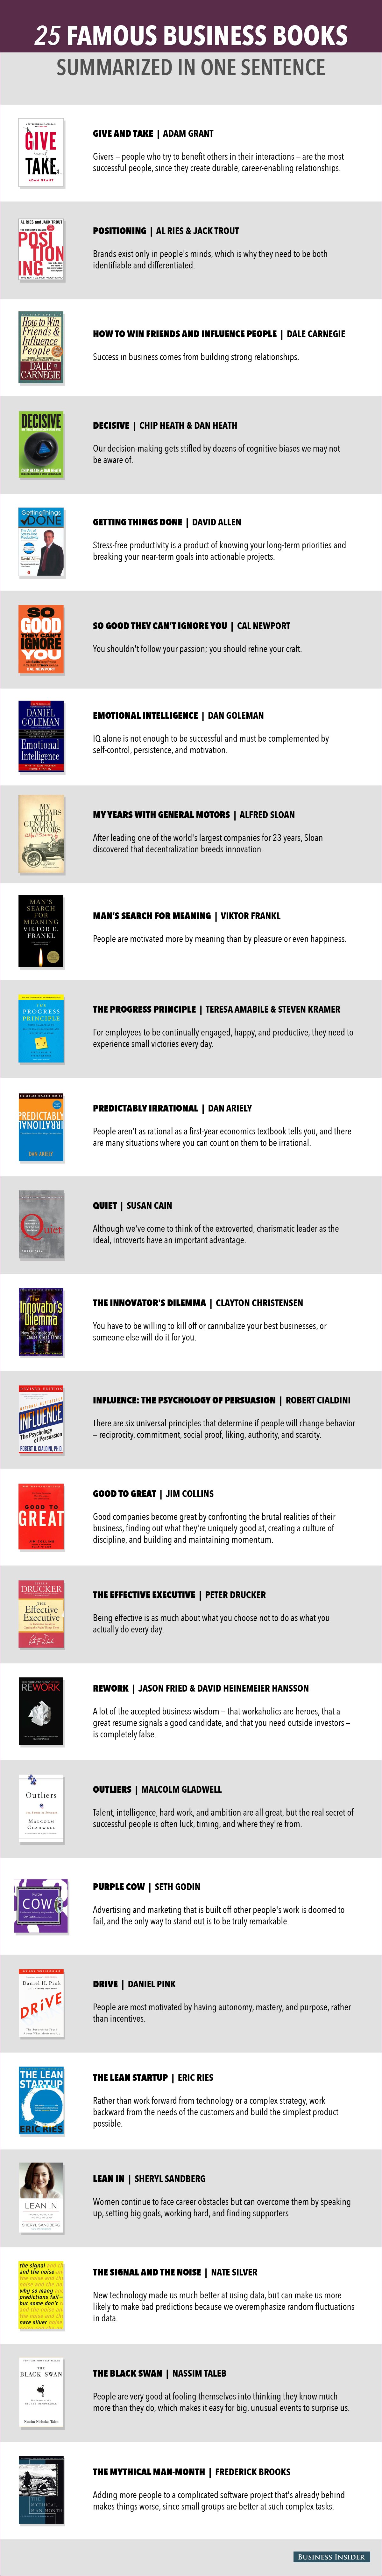 famous-business-book-summaries